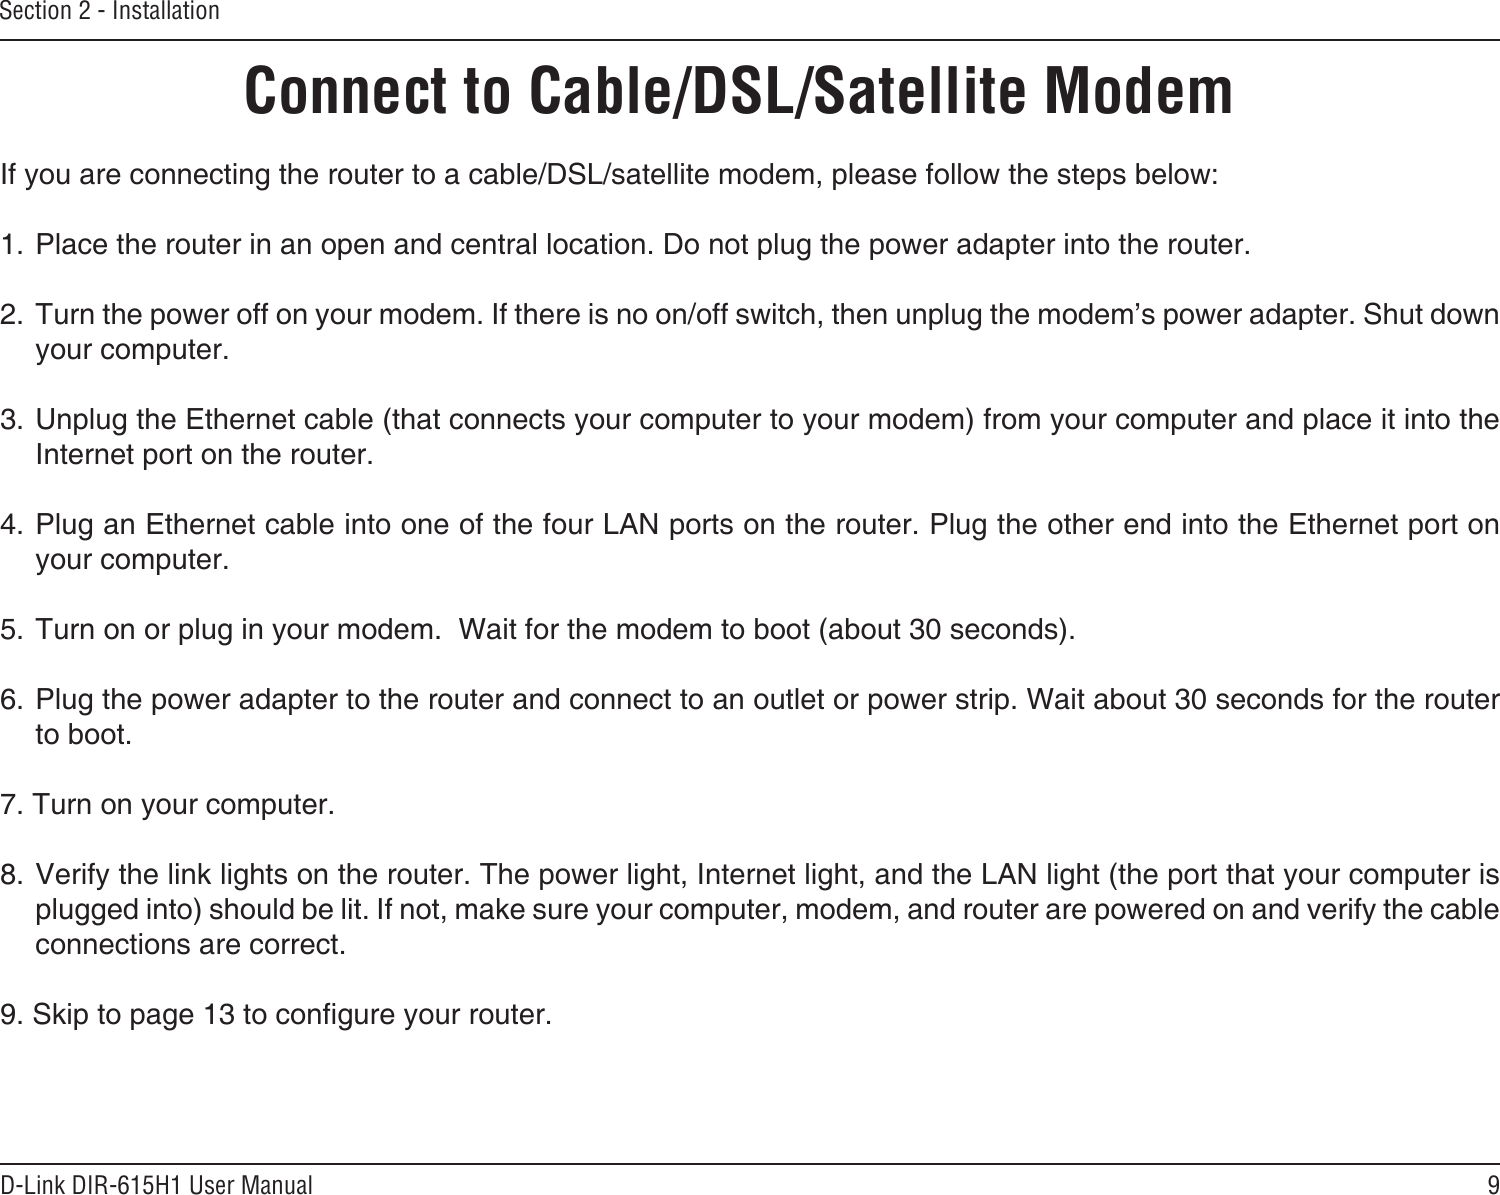 9D-Link DIR-615H1 User ManualSection 2 - InstallationIf you are connecting the router to a cable/DSL/satellite modem, please follow the steps below:1. Place the router in an open and central location. Do not plug the power adapter into the router. 2. Turn the power off on your modem. If there is no on/off switch, then unplug the modem’s power adapter. Shut down your computer.3. Unplug the Ethernet cable (that connects your computer to your modem) from your computer and place it into the Internet port on the router.  4. Plug an Ethernet cable into one of the four LAN ports on the router. Plug the other end into the Ethernet port on your computer.5. Turn on or plug in your modem.  Wait for the modem to boot (about 30 seconds). 6. Plug the power adapter to the router and connect to an outlet or power strip. Wait about 30 seconds for the router to boot. 7. Turn on your computer. 8. Verify the link lights on the router. The power light, Internet light, and the LAN light (the port that your computer is plugged into) should be lit. If not, make sure your computer, modem, and router are powered on and verify the cable connections are correct. 9. Skip to page 13 to congure your router. Connect to Cable/DSL/Satellite Modem